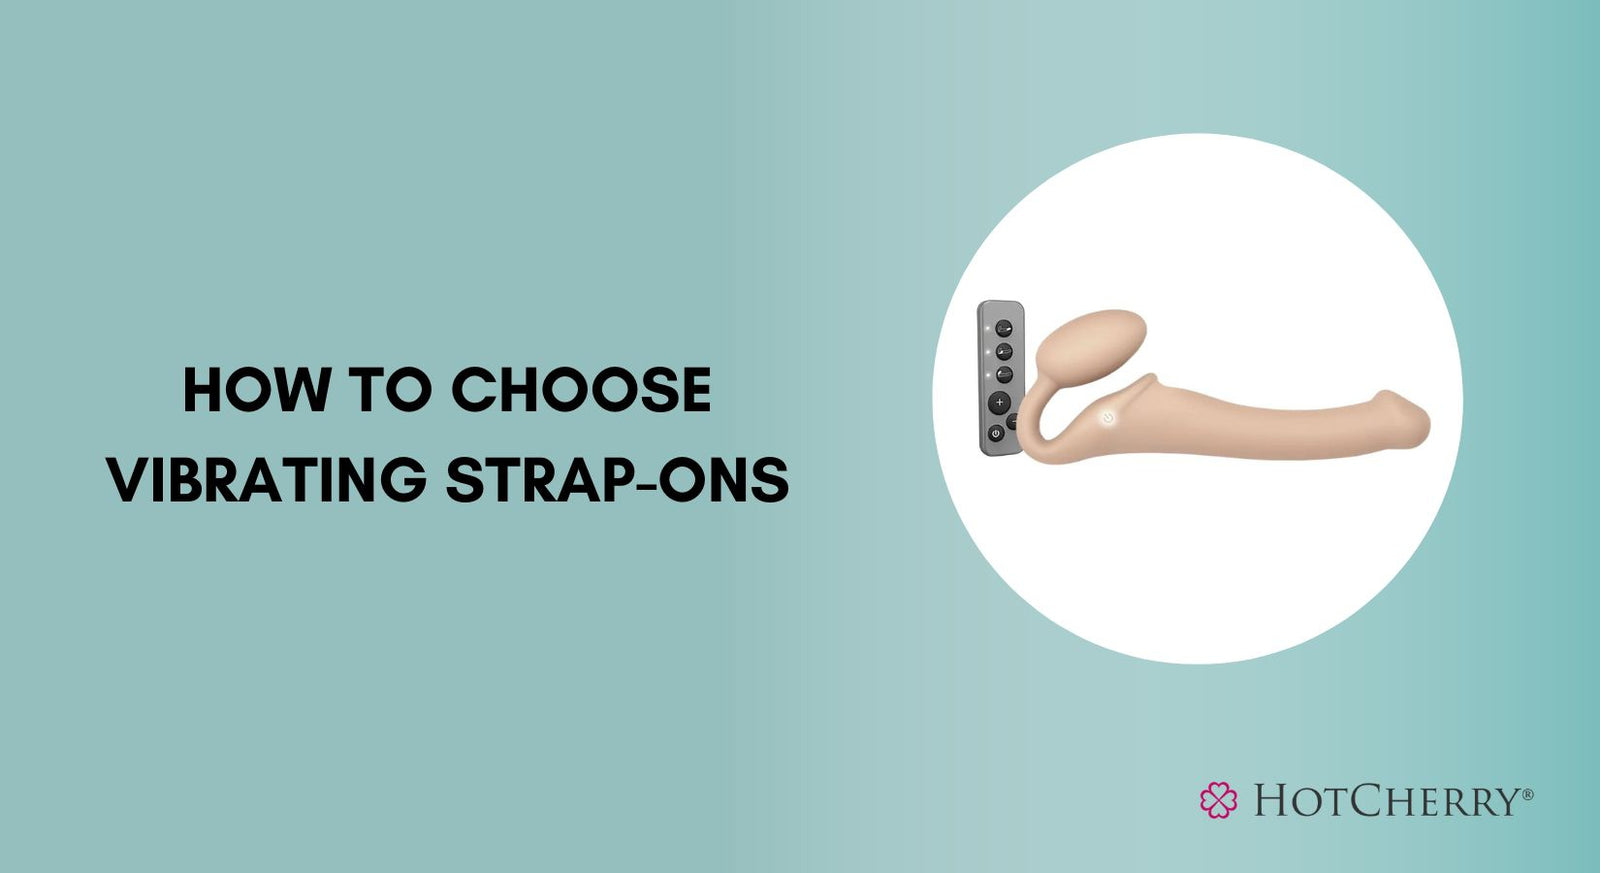 How to Choose Vibrating Strap-Ons